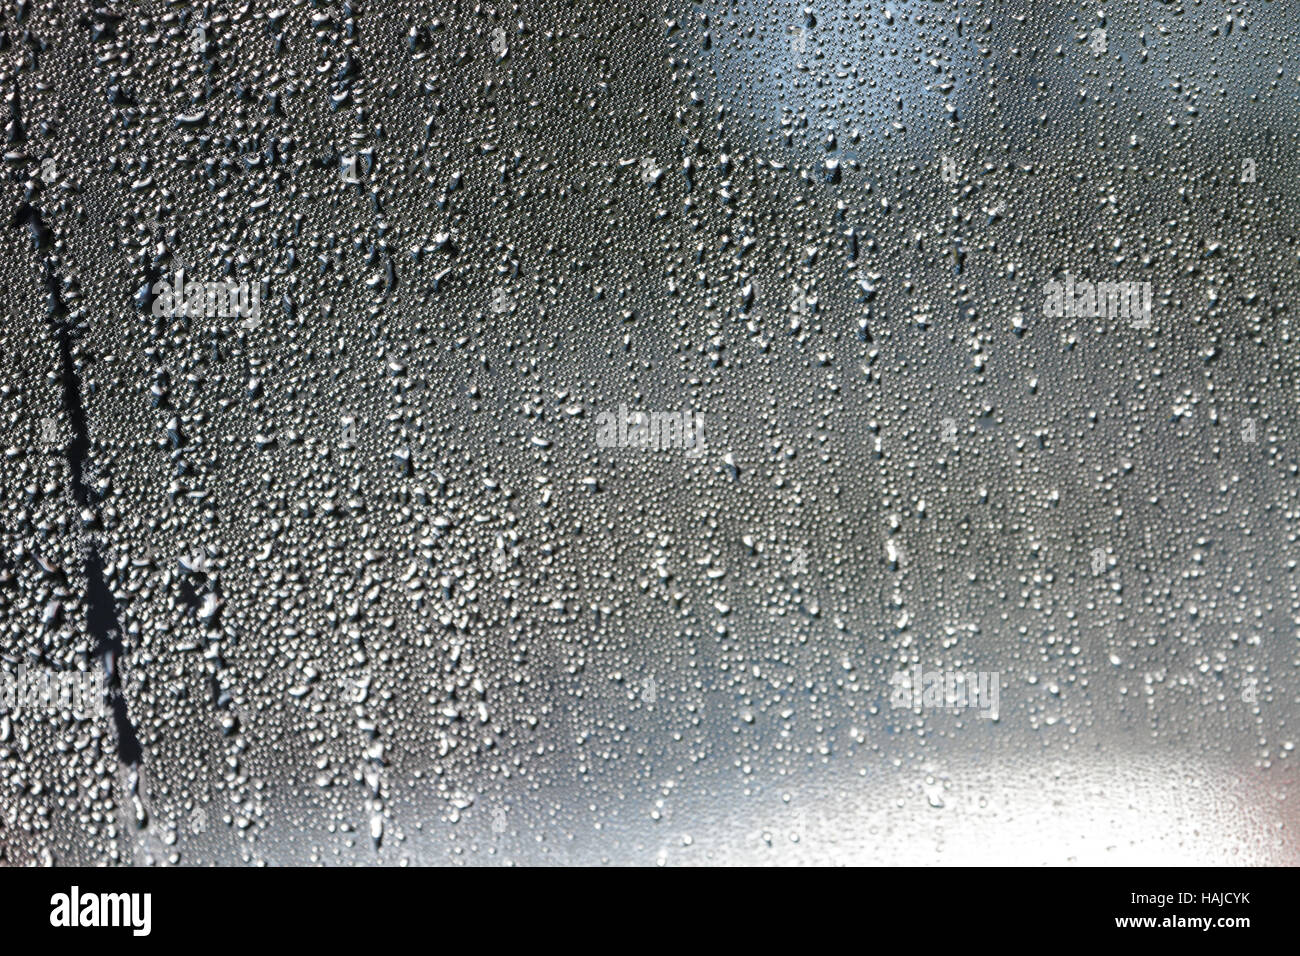 abstract blur Natural water drops on glass Stock Photo